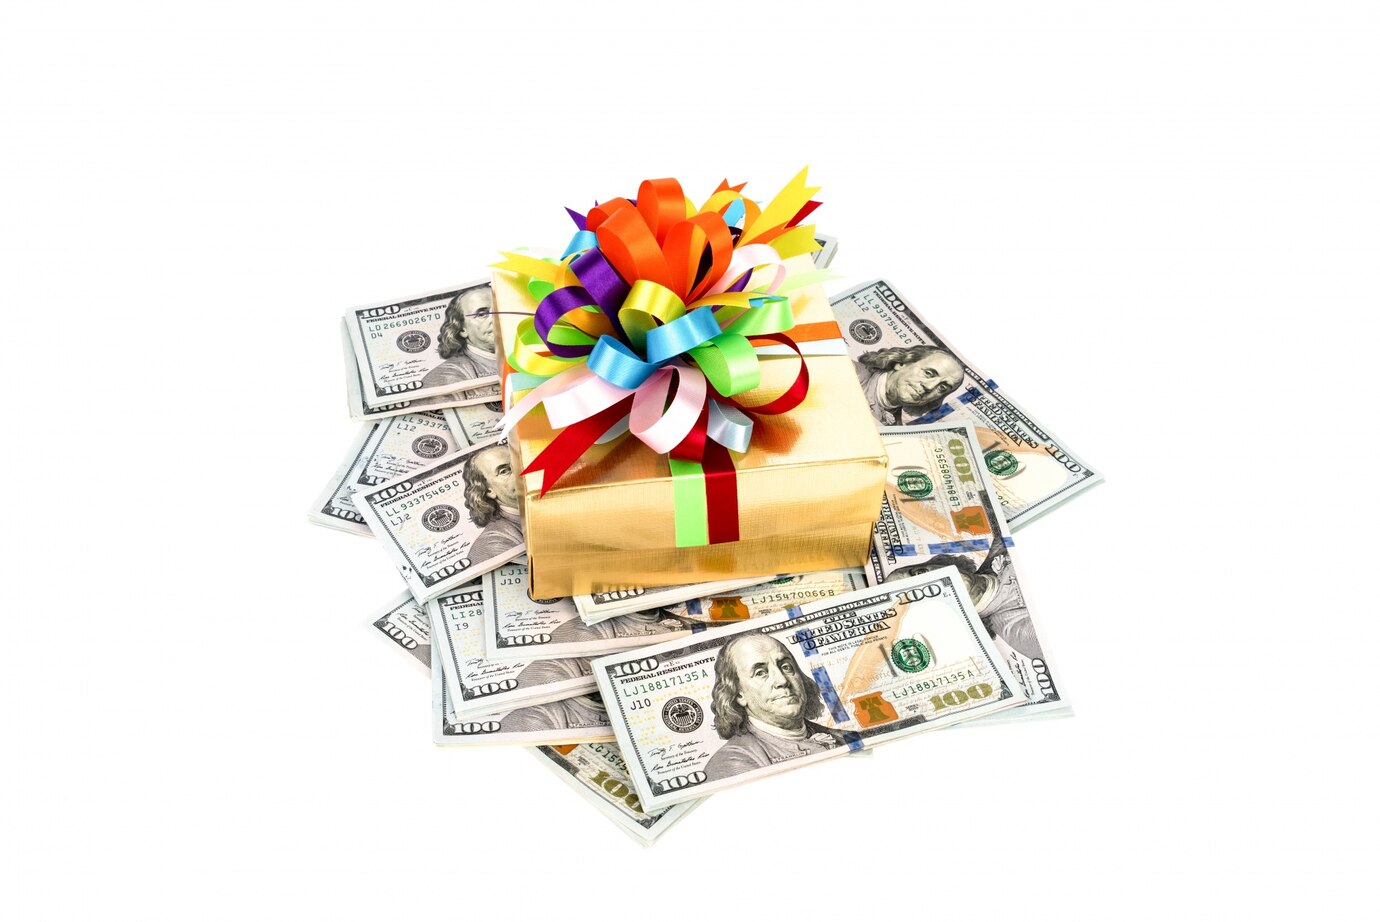 Why Choose Funny Gift Ideas To Give Money?